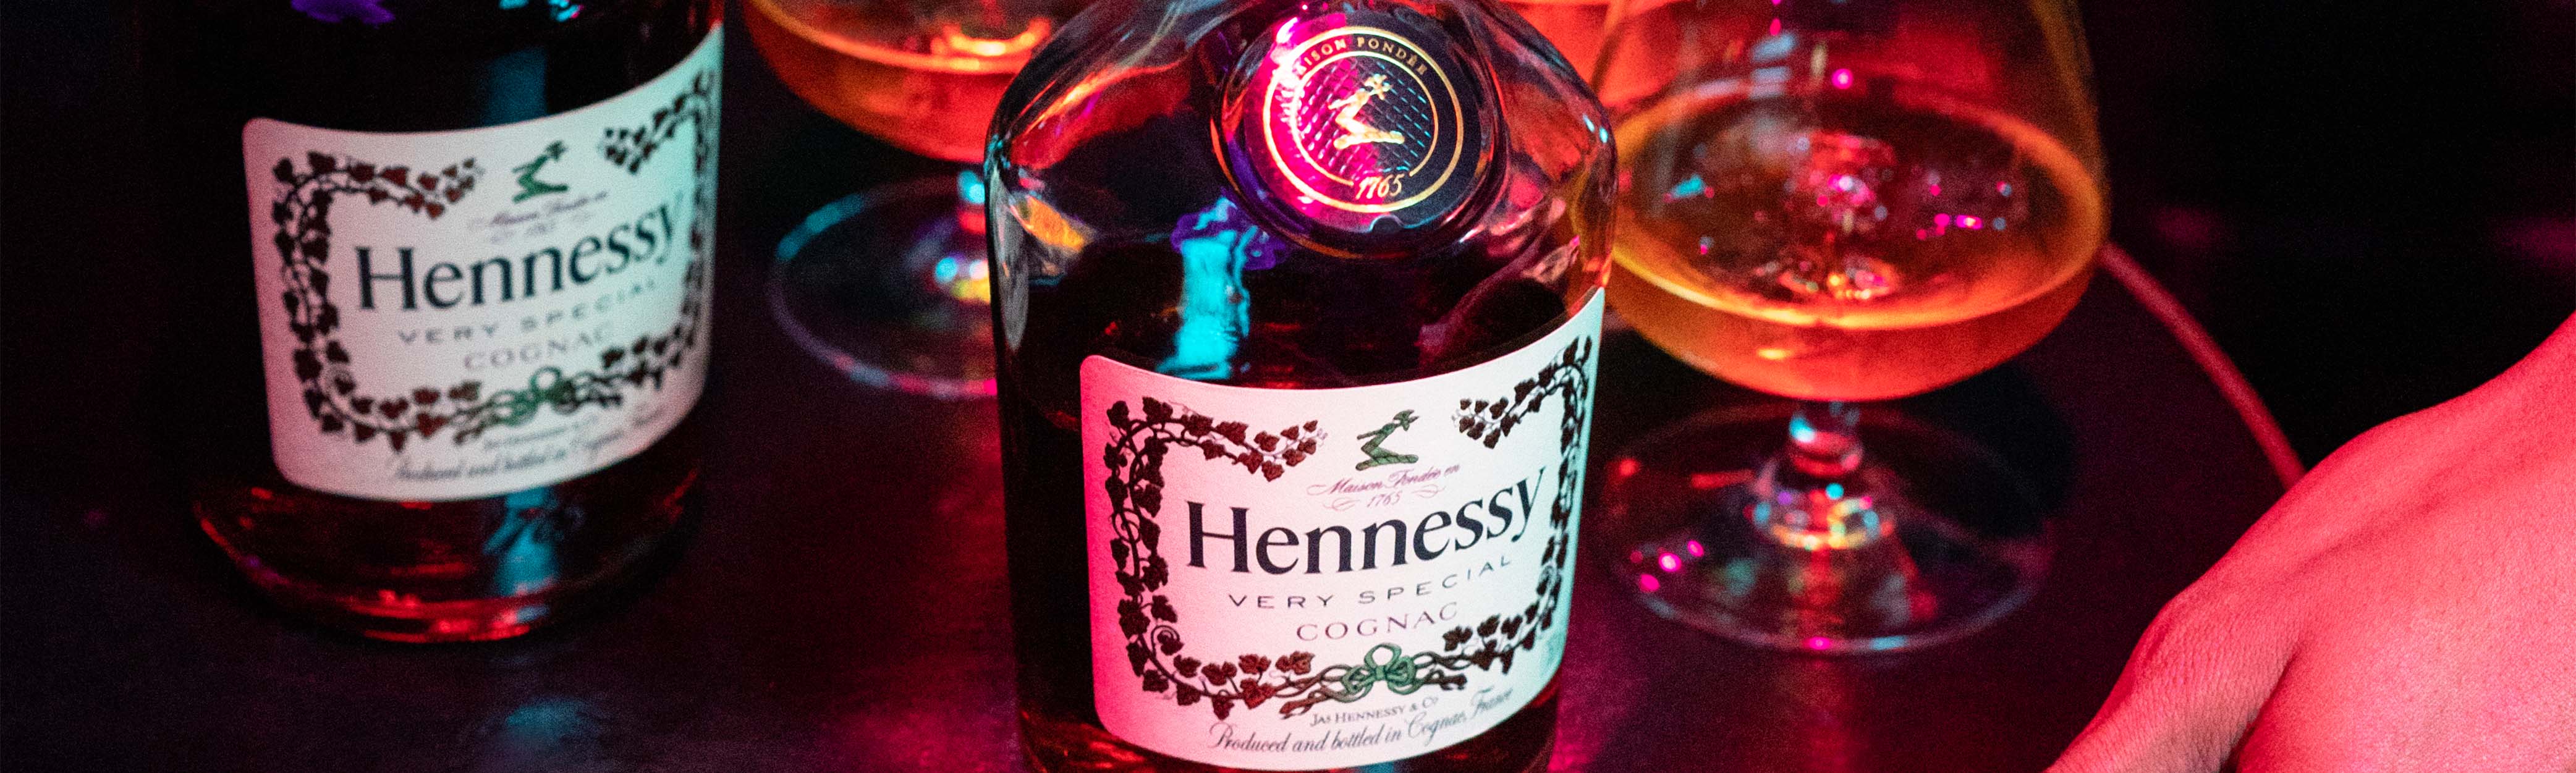 Hennessy Very Special Cognac 40% Vol. 0,7l in Giftbox